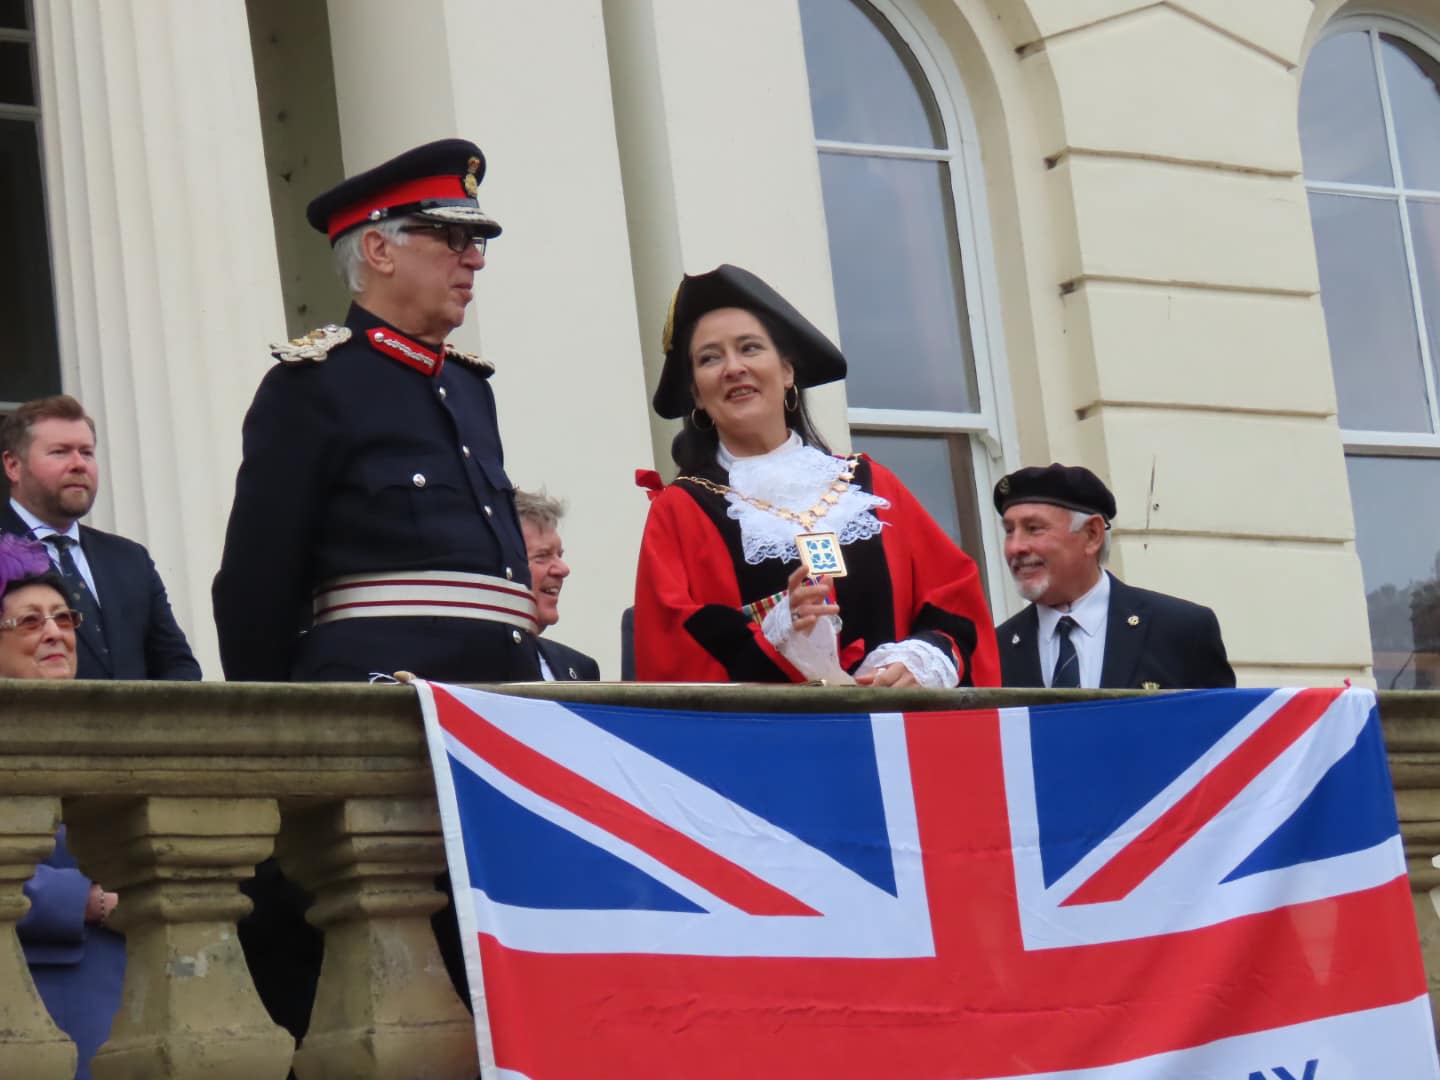 Mayor of Sefton Cllr Clare Carragher and the Lord Lieutenant of Merseyside Mark Blundell at Southport Town Hall at Armed Forces Day in Southport. Photo by Andrew Brown Media